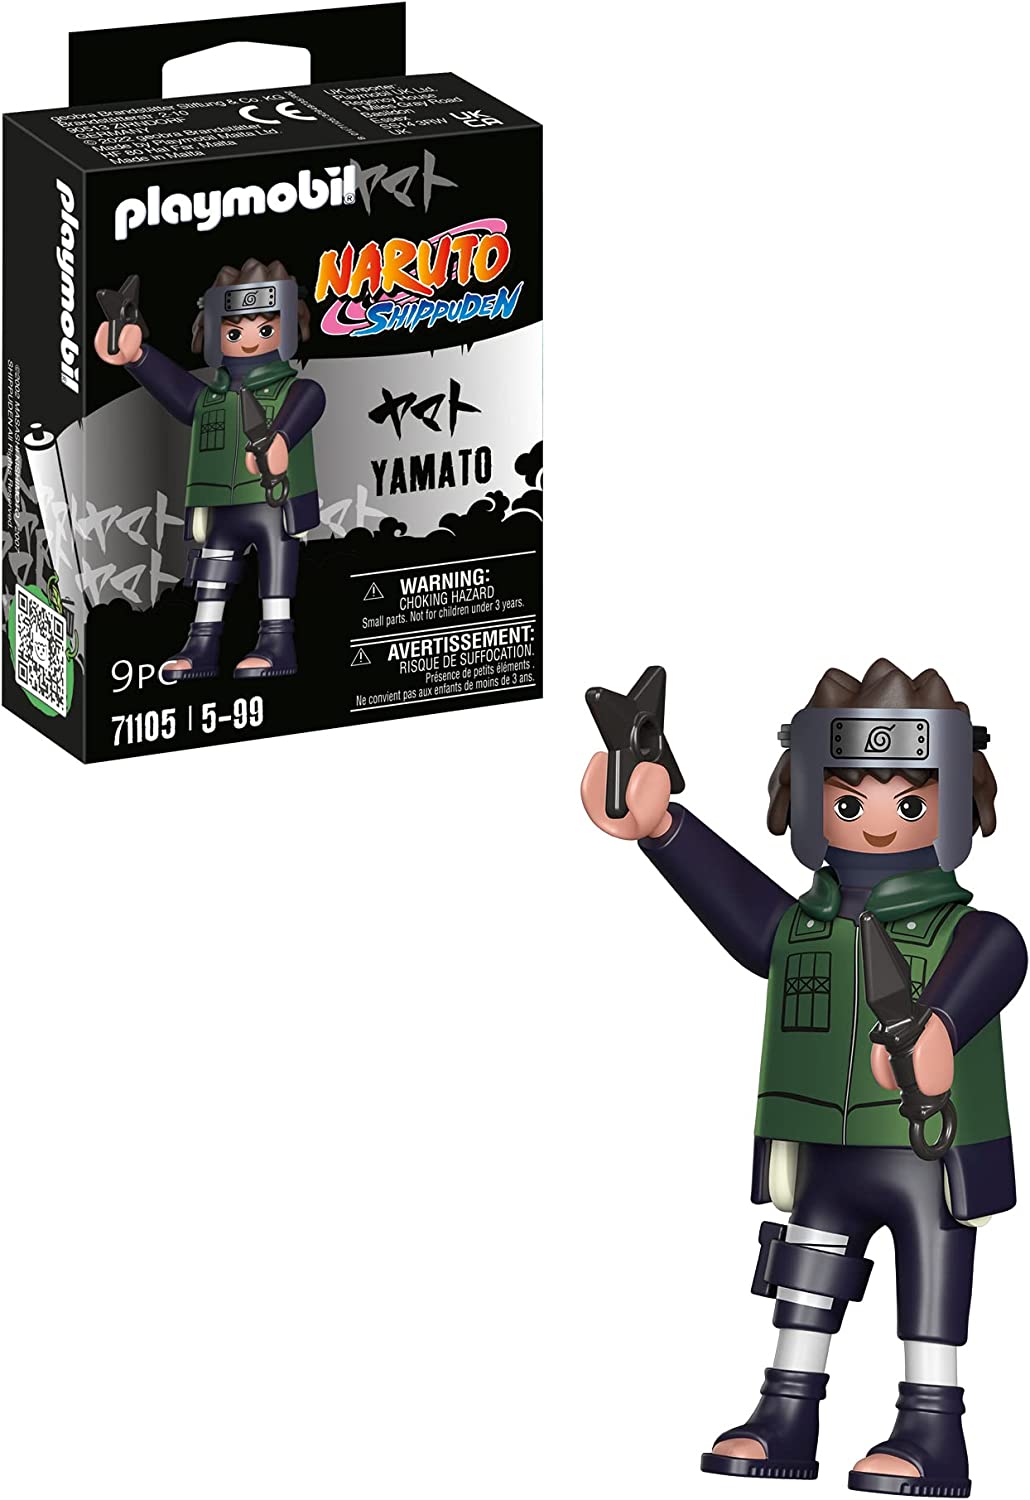 Playmobil Naruto Shippuden 71105 Yamato in Green Jacket with Mask, Cheek Protection as Well as Kunai and Stick, Creative Fun for Anime Fans With Great Details and Extras, 9 Pieces, From 5 Years